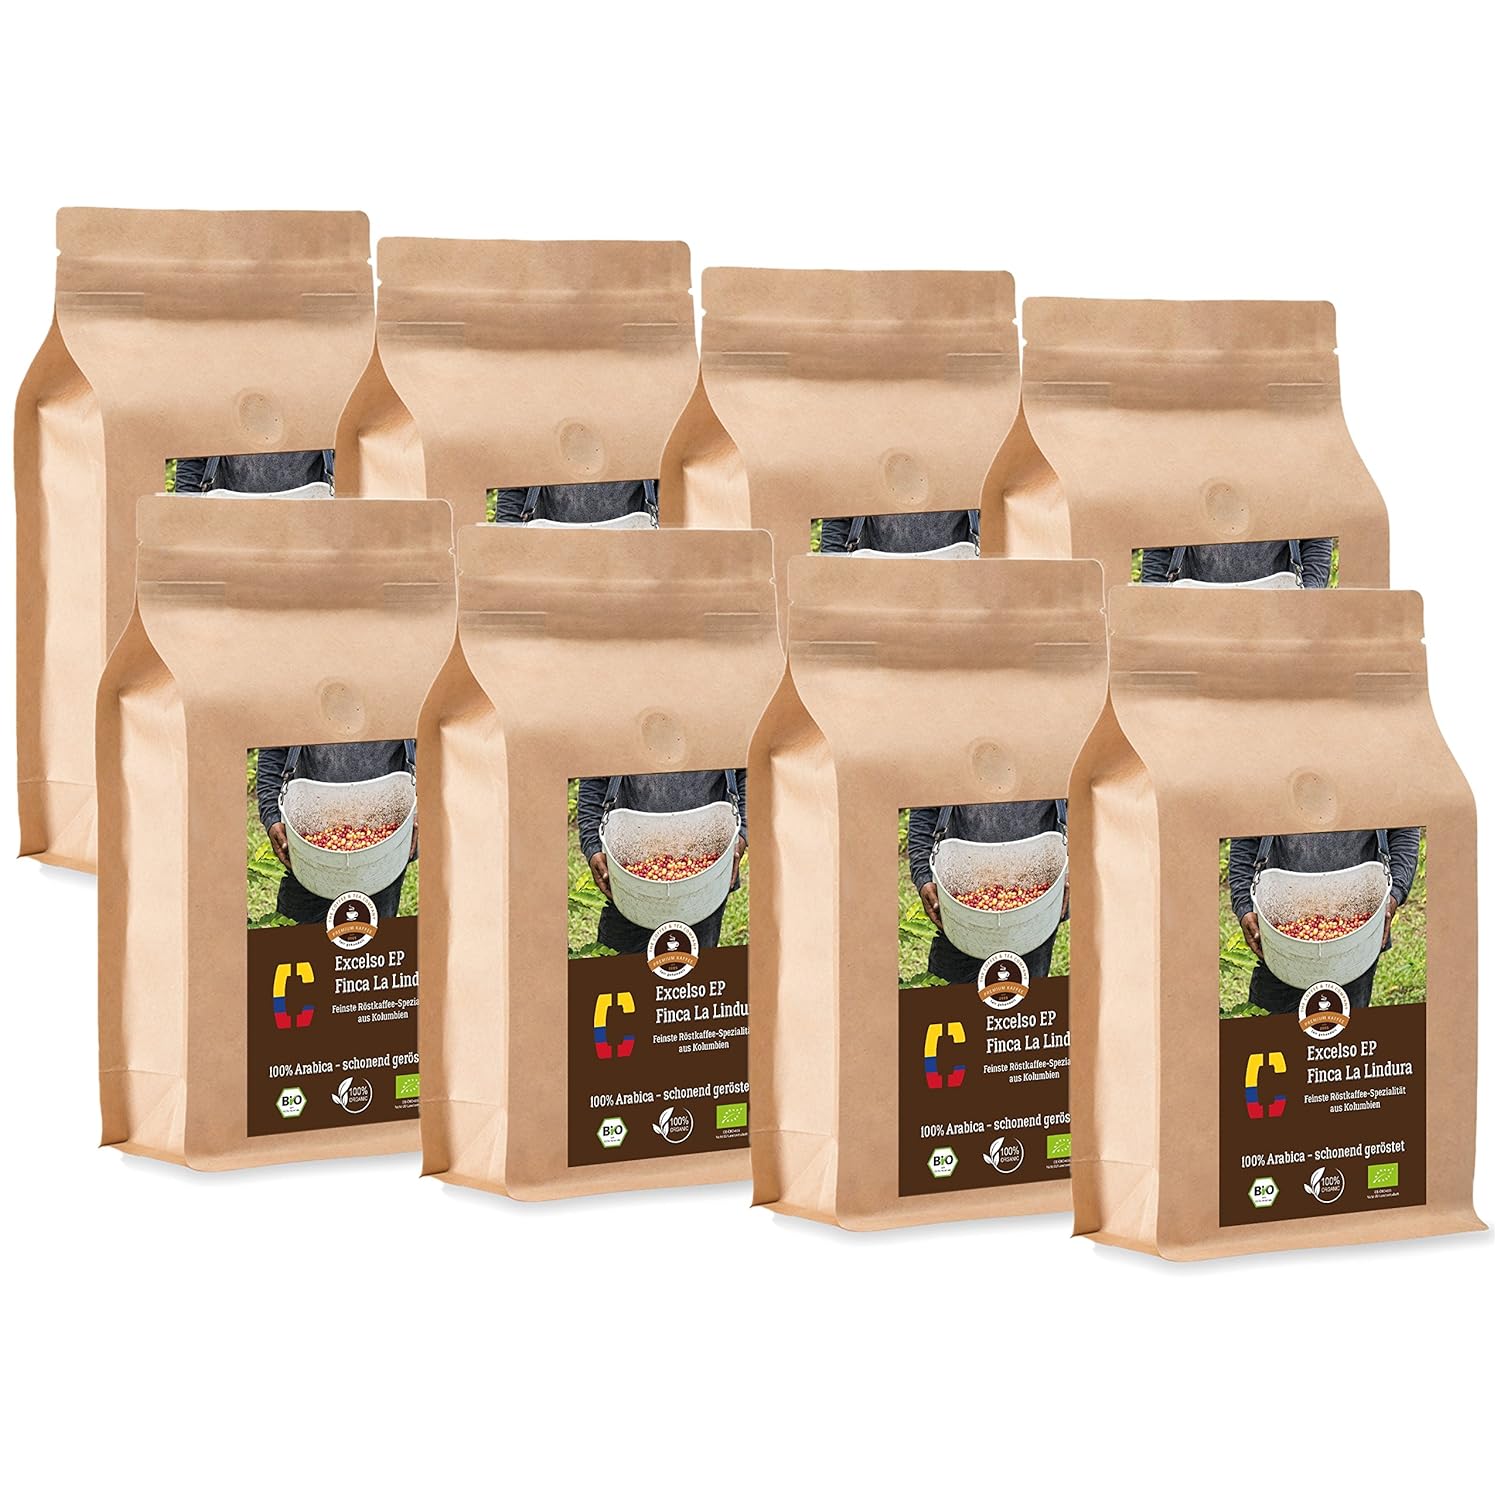 Coffee Globetrotter - Colombia Excelso EP Finca la Lindura - Organic - 8 x 1000 g Very Fine Ground - for Fully Automatic Coffee Grinder - Roasted Coffee from Organic Cultivation | Gastropack Economy